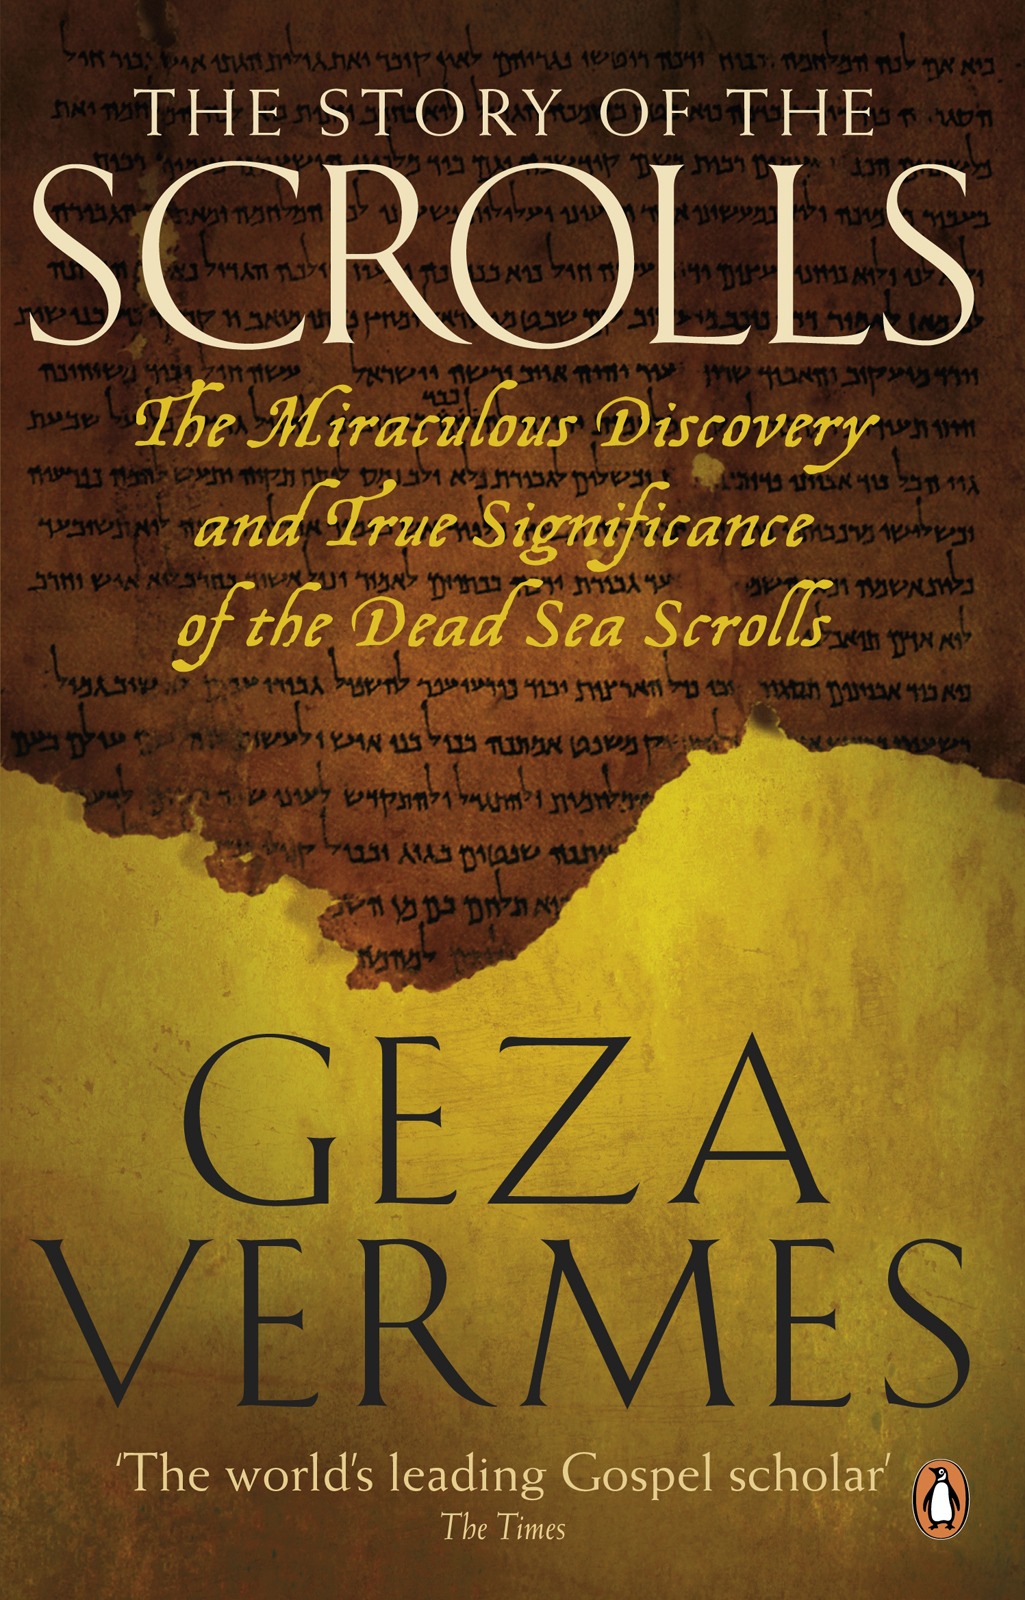 The Story of the Scrolls: The Miraculous Discovery and True Significance of the Dead Sea Scrolls